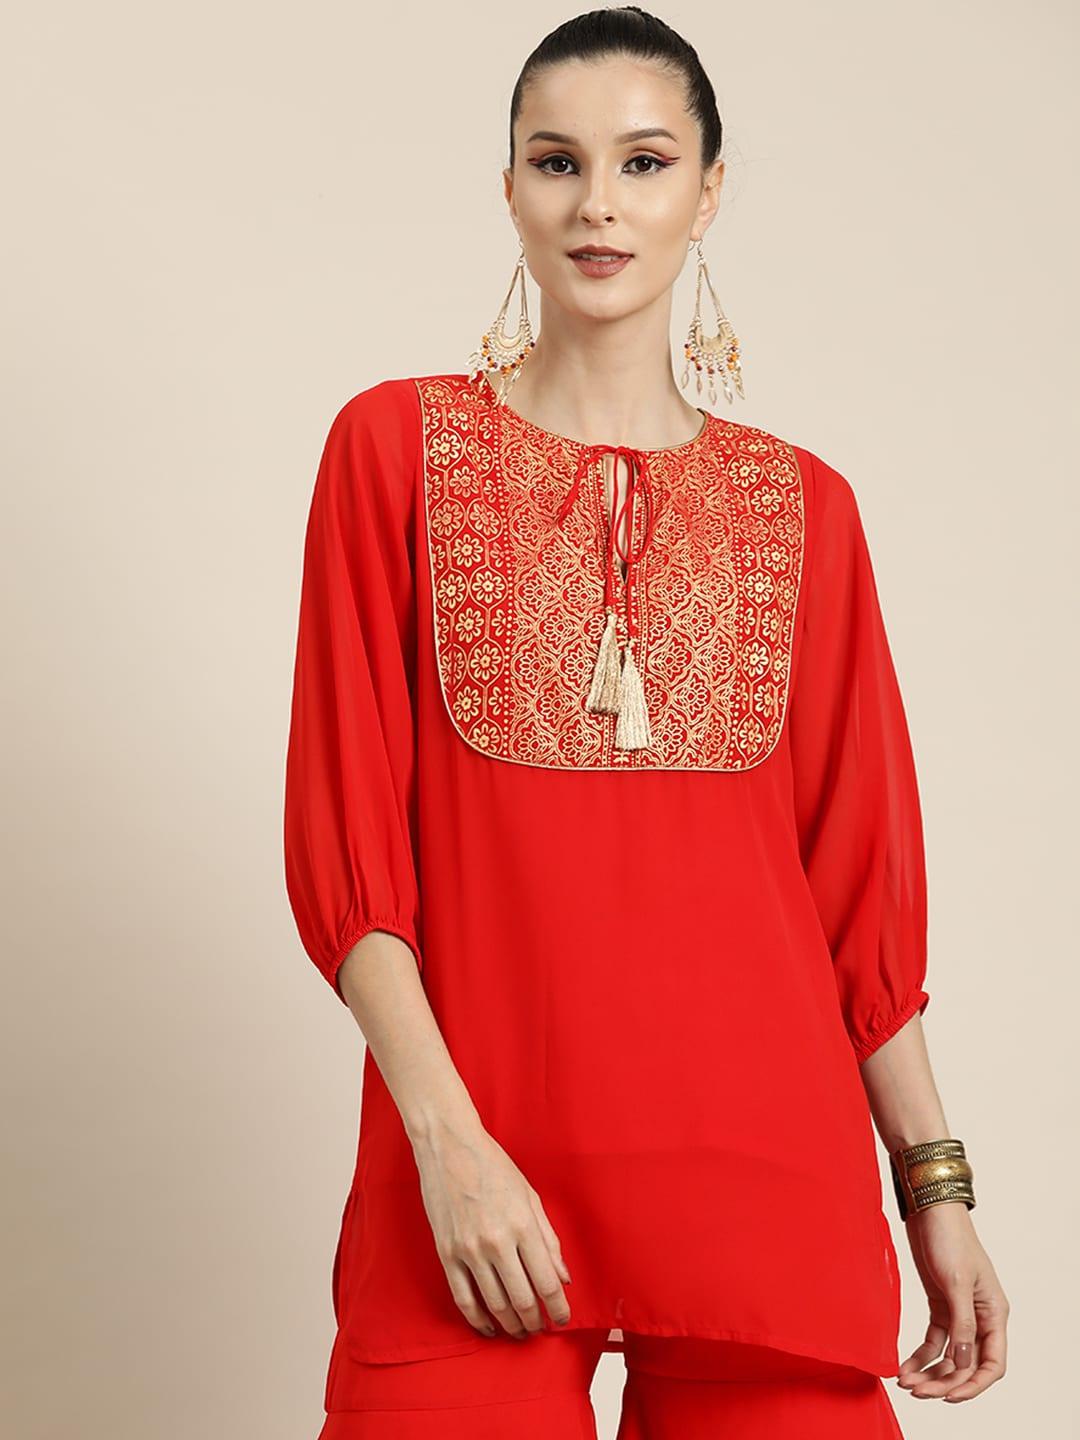 shae-by-sassafras-red-&-gold-toned-printed-tunic